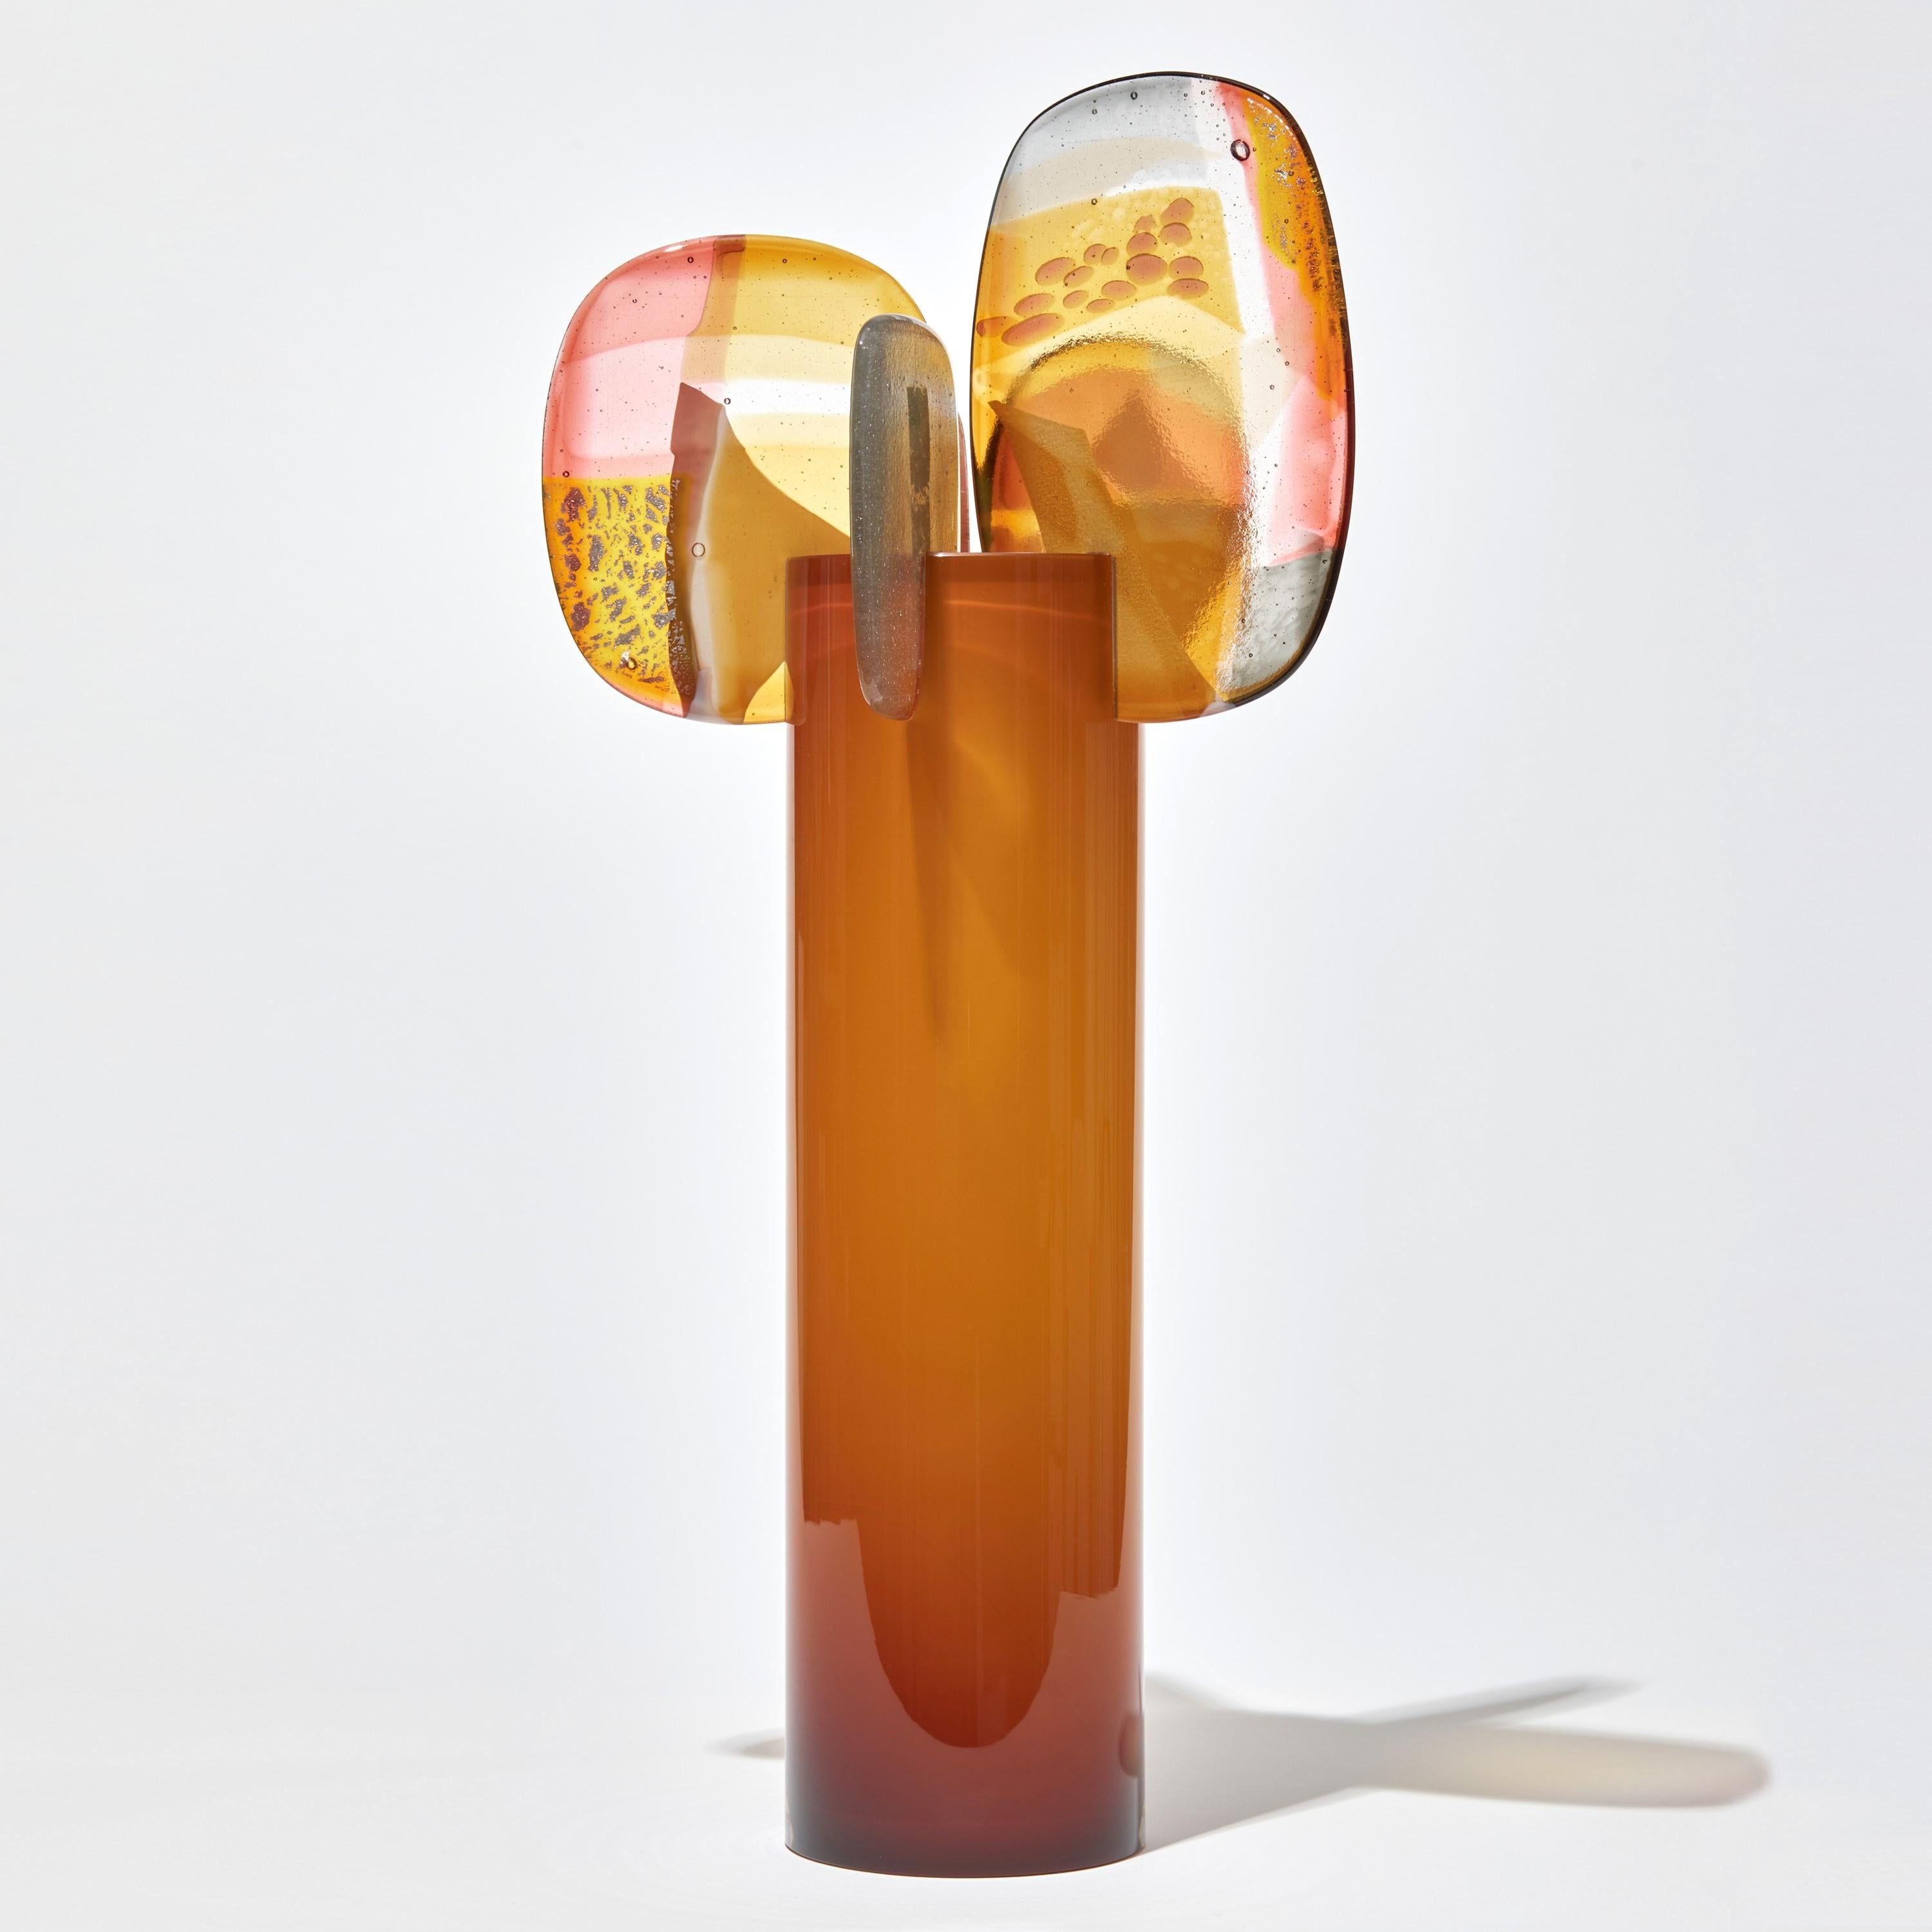 'Paradise 04 in Amber' is a unique glass sculpture created using hybrid hand-made glass techniques by the British artist Amy Cushing. Combining mouth blown glass with kiln formed glass, each piece within the collection displays a multiple of highly